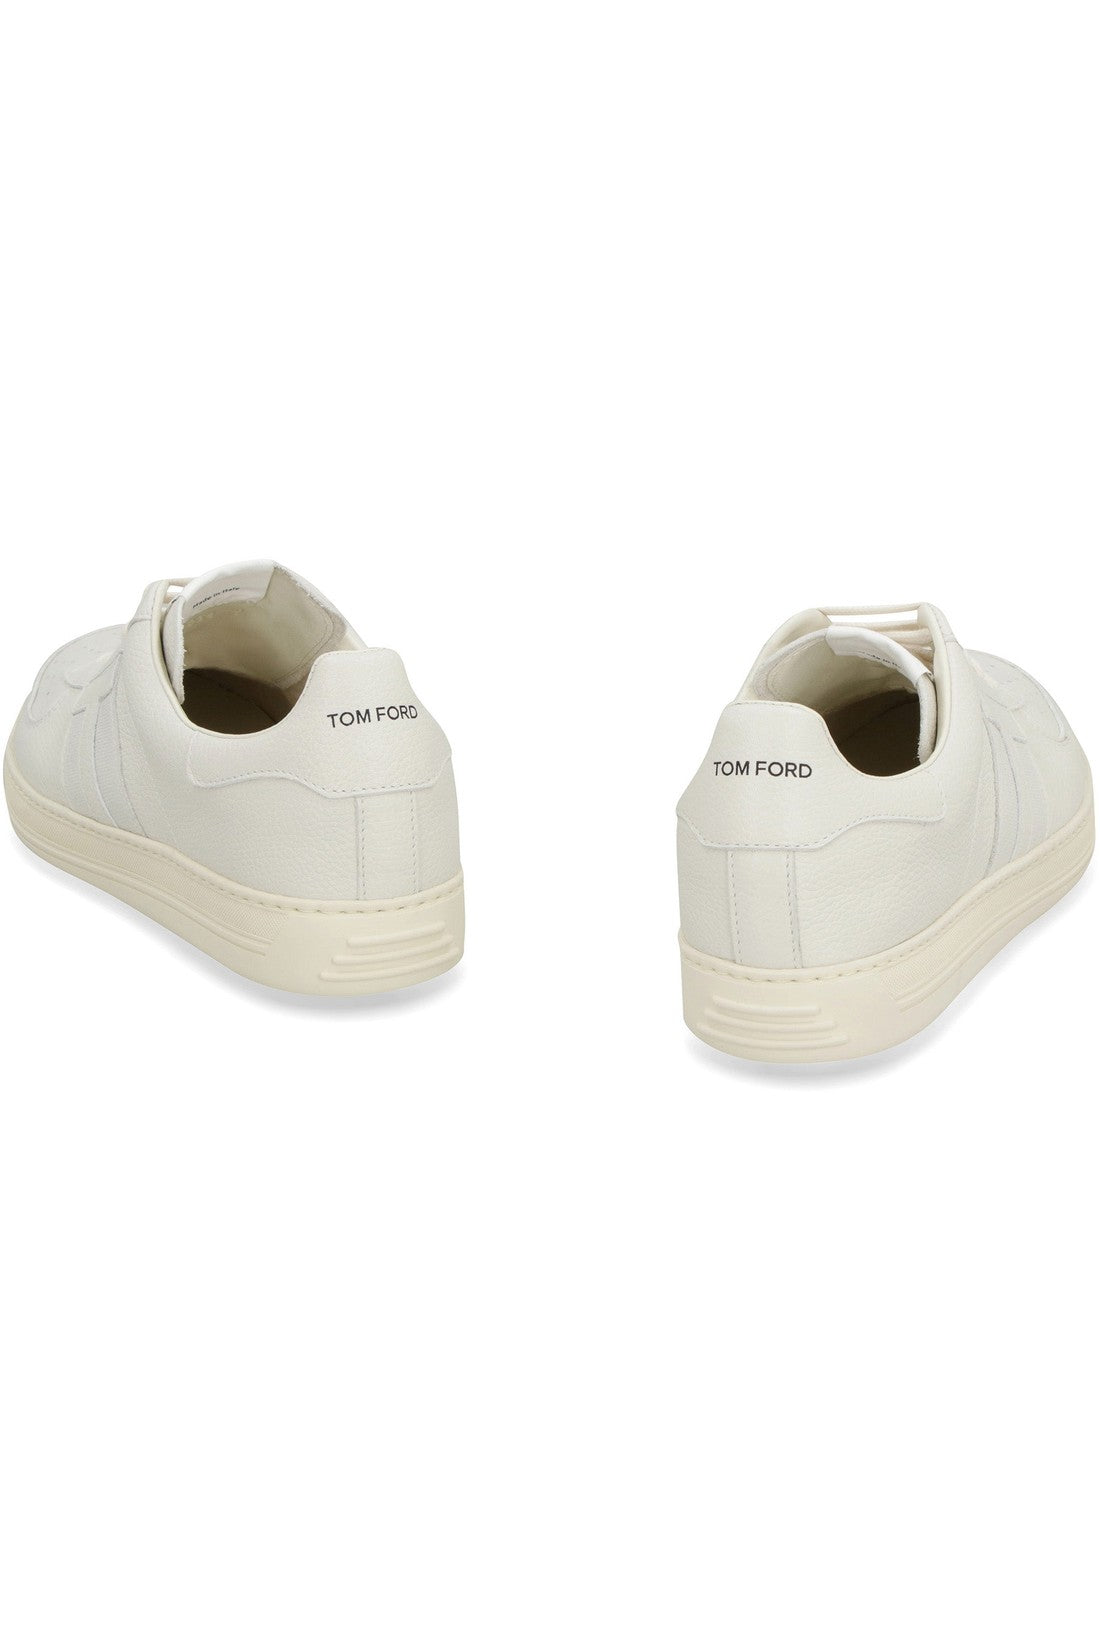 Tom Ford-OUTLET-SALE-Radcliffe leather low-top sneakers-ARCHIVIST